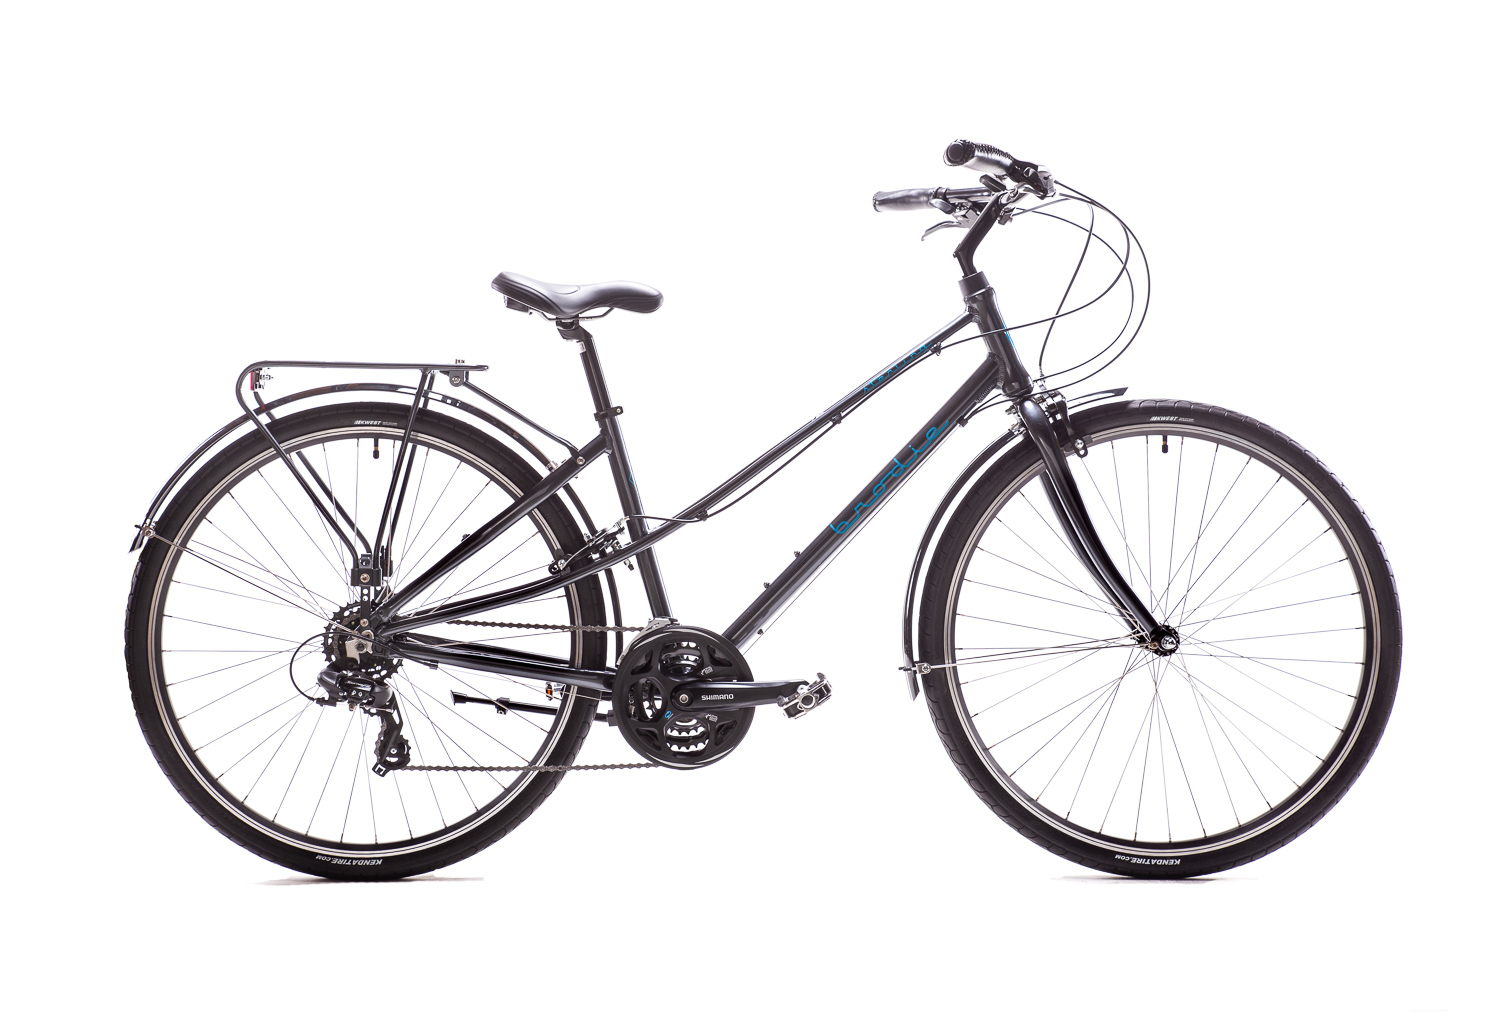 Sterling Mixte - $699 (MIXTE SOLD OUT - Traditional frame style available in Medium &amp; Large)